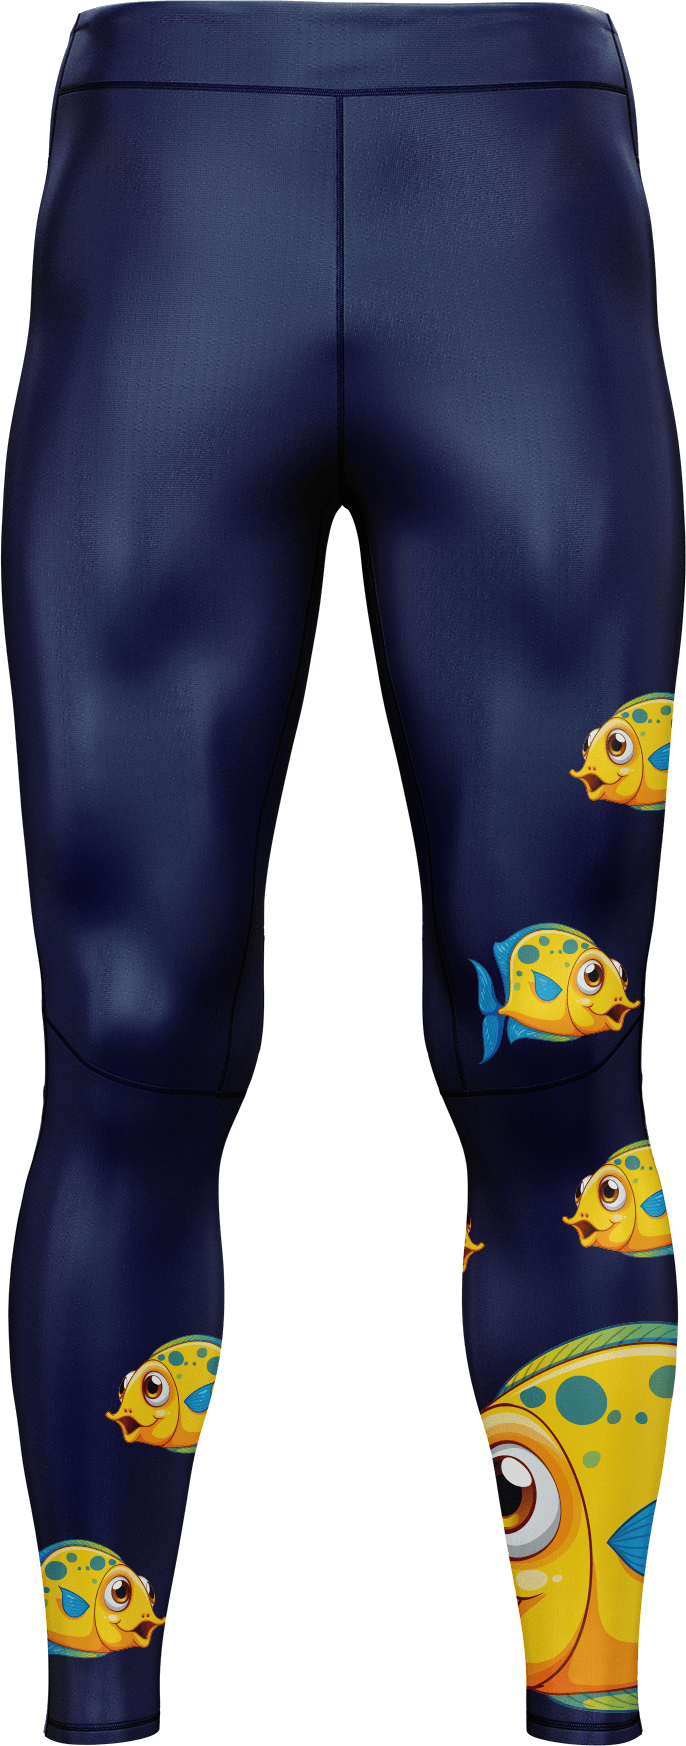 Fish Out Of Water tights 3/4 or full length - fungear.com.au